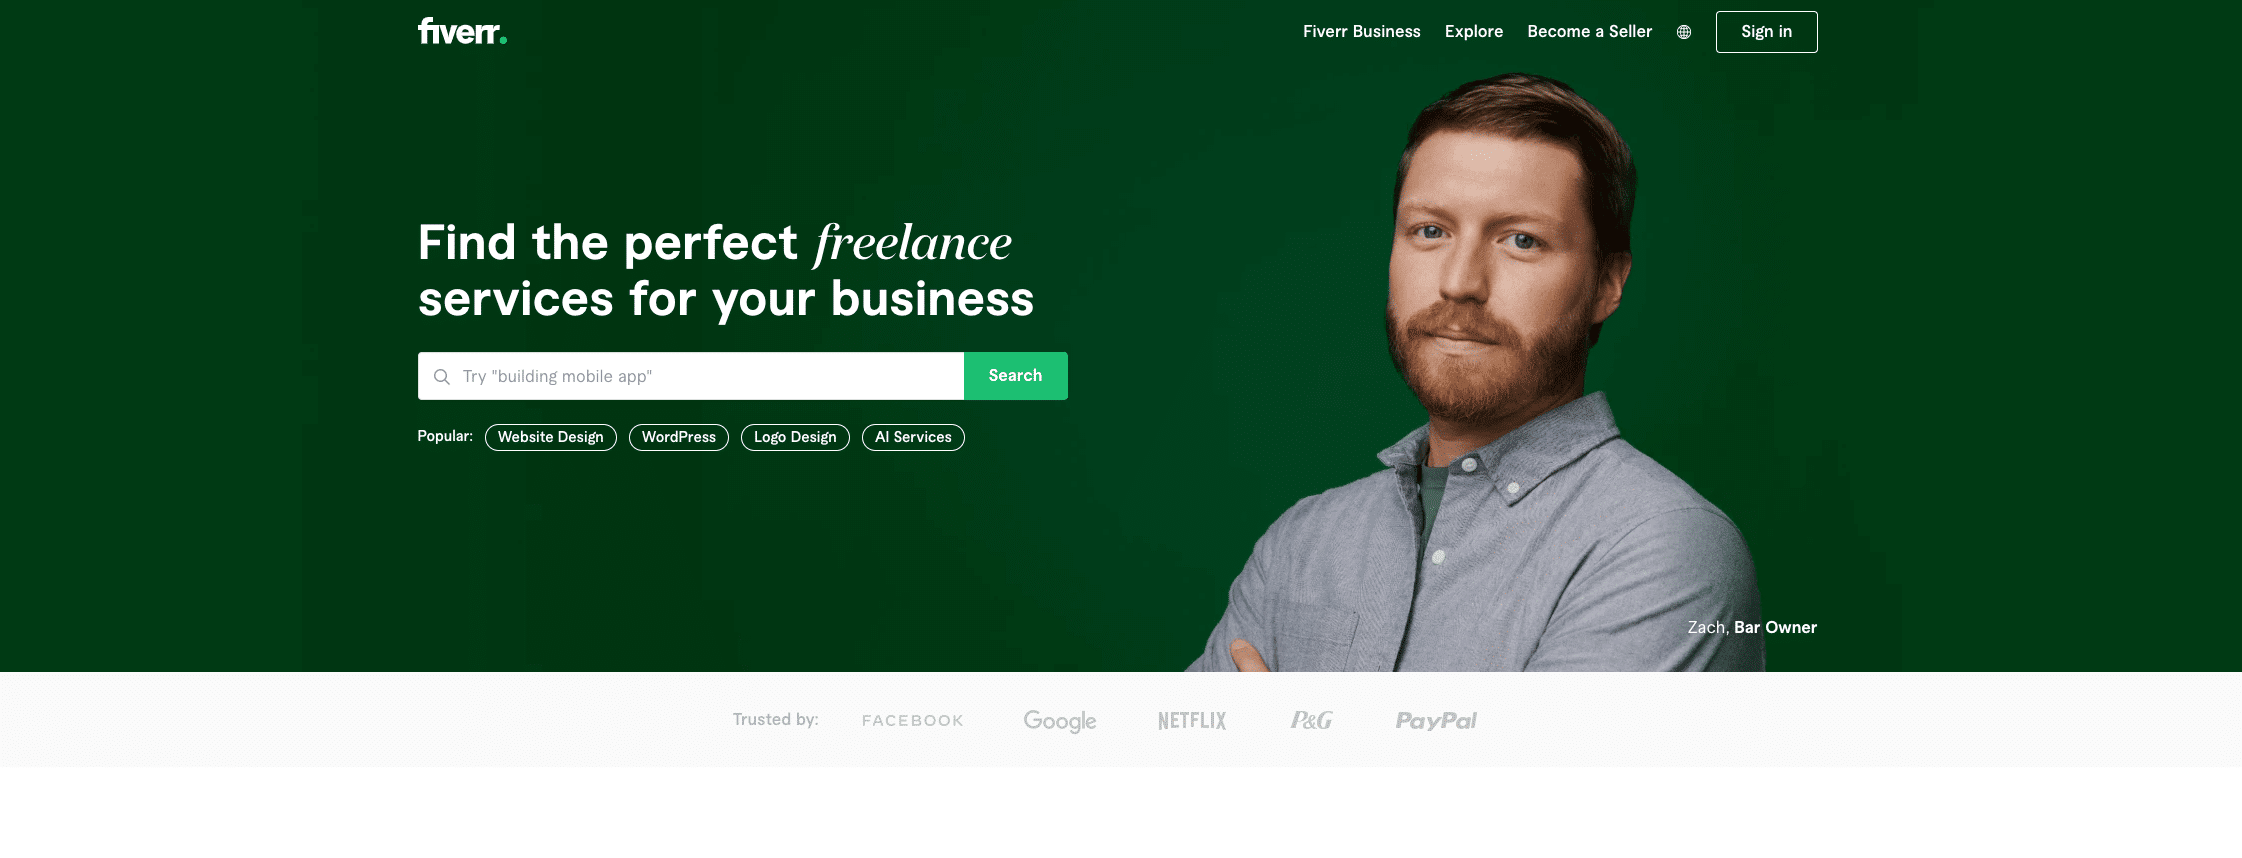 Fiverr Home Page